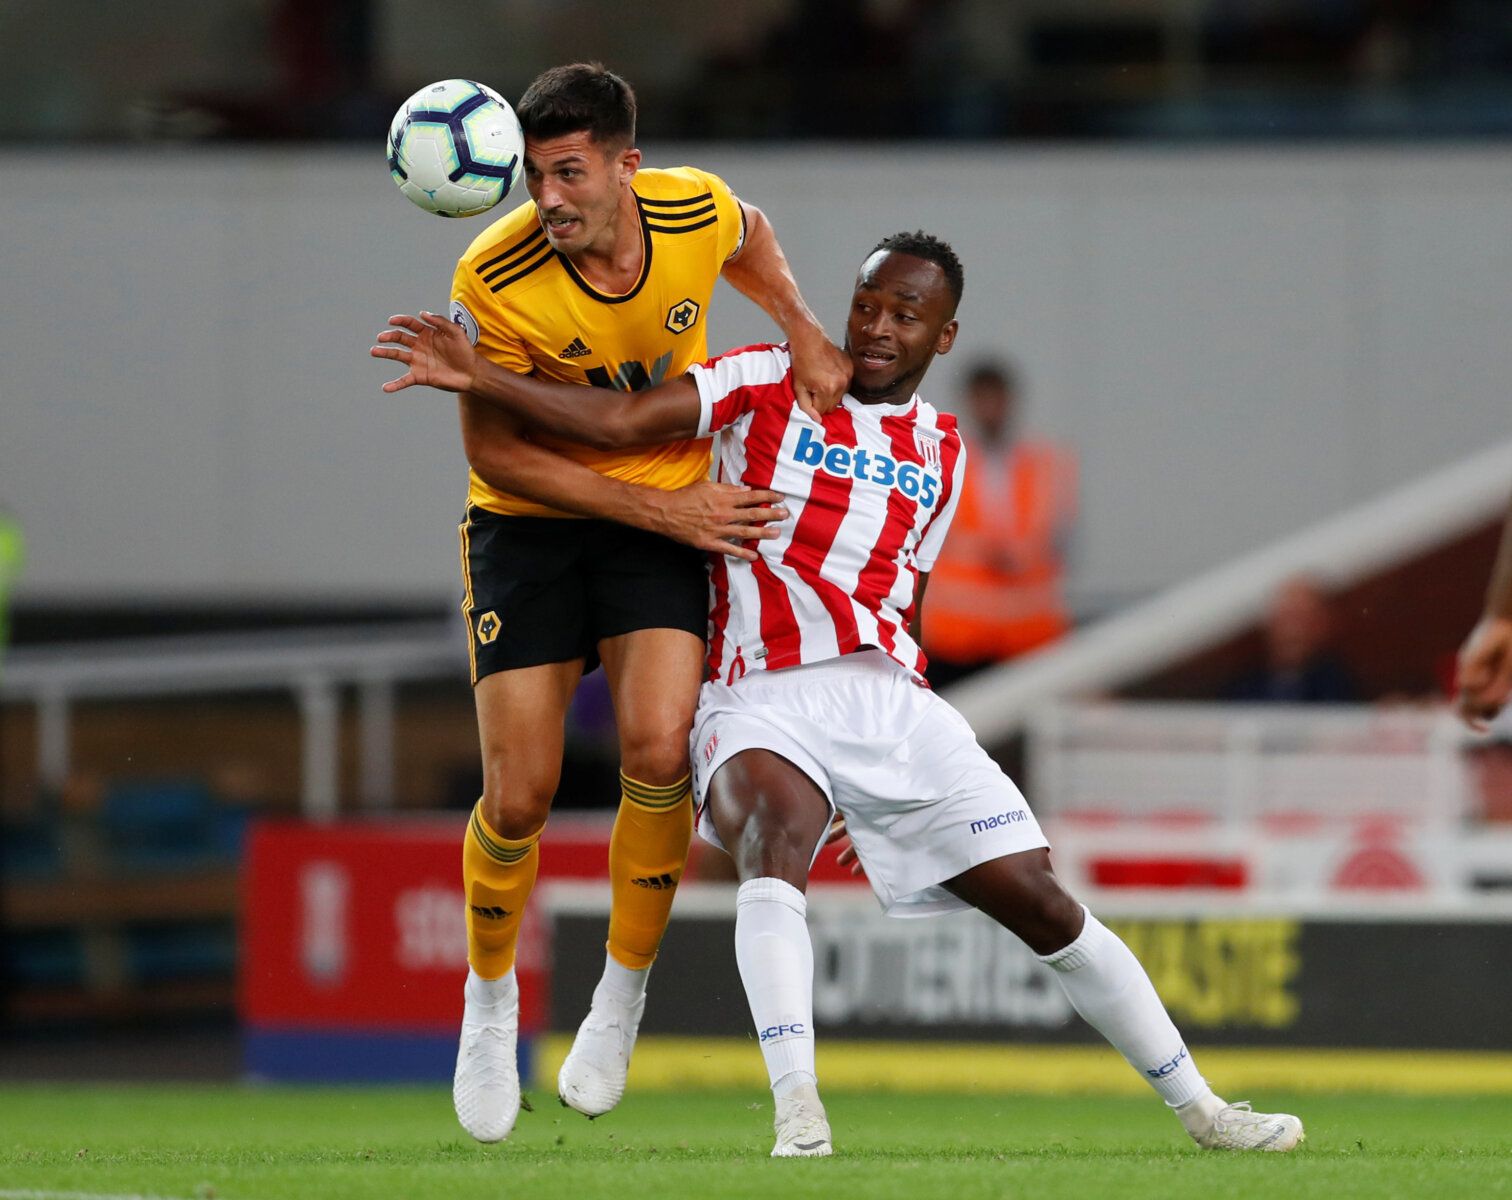 Soccer Football - Pre Season Friendly - Stoke City v Wolverhampton Wanderers - bet365 Stadium, Stoke-on-Trent, Britain - July 25, 2018   Wolverhampton Wanderers’ Danny Batth in action with Stoke City's Saido Berahino     Action Images via Reuters/Matthew Childs